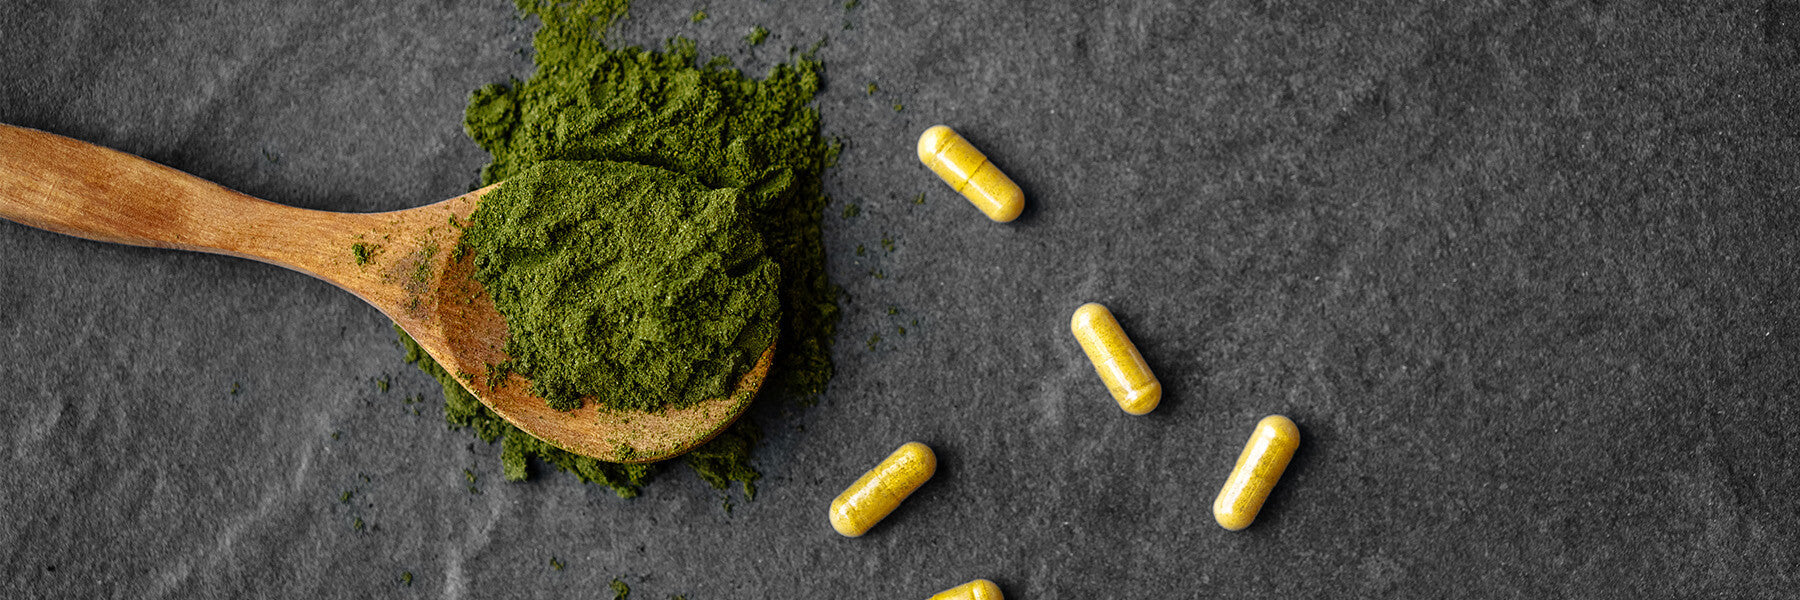 Are Greens Powders Actually Good For You? RDs Weigh In